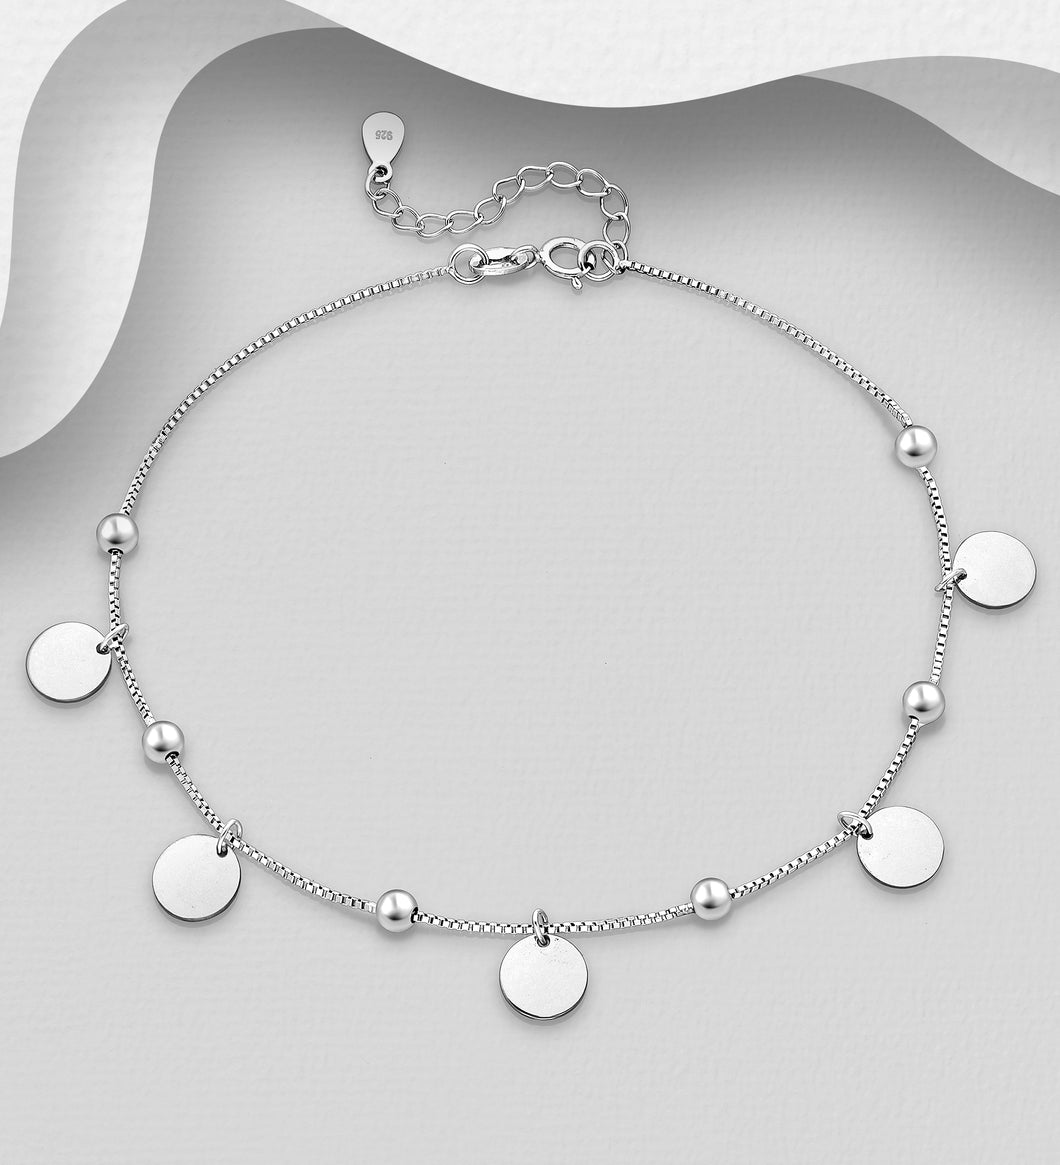 sterling silver anklet, gifts for ladies, gifts for girls, gifts for the wife, silver jewellery gifts, small silver jewellery gifts